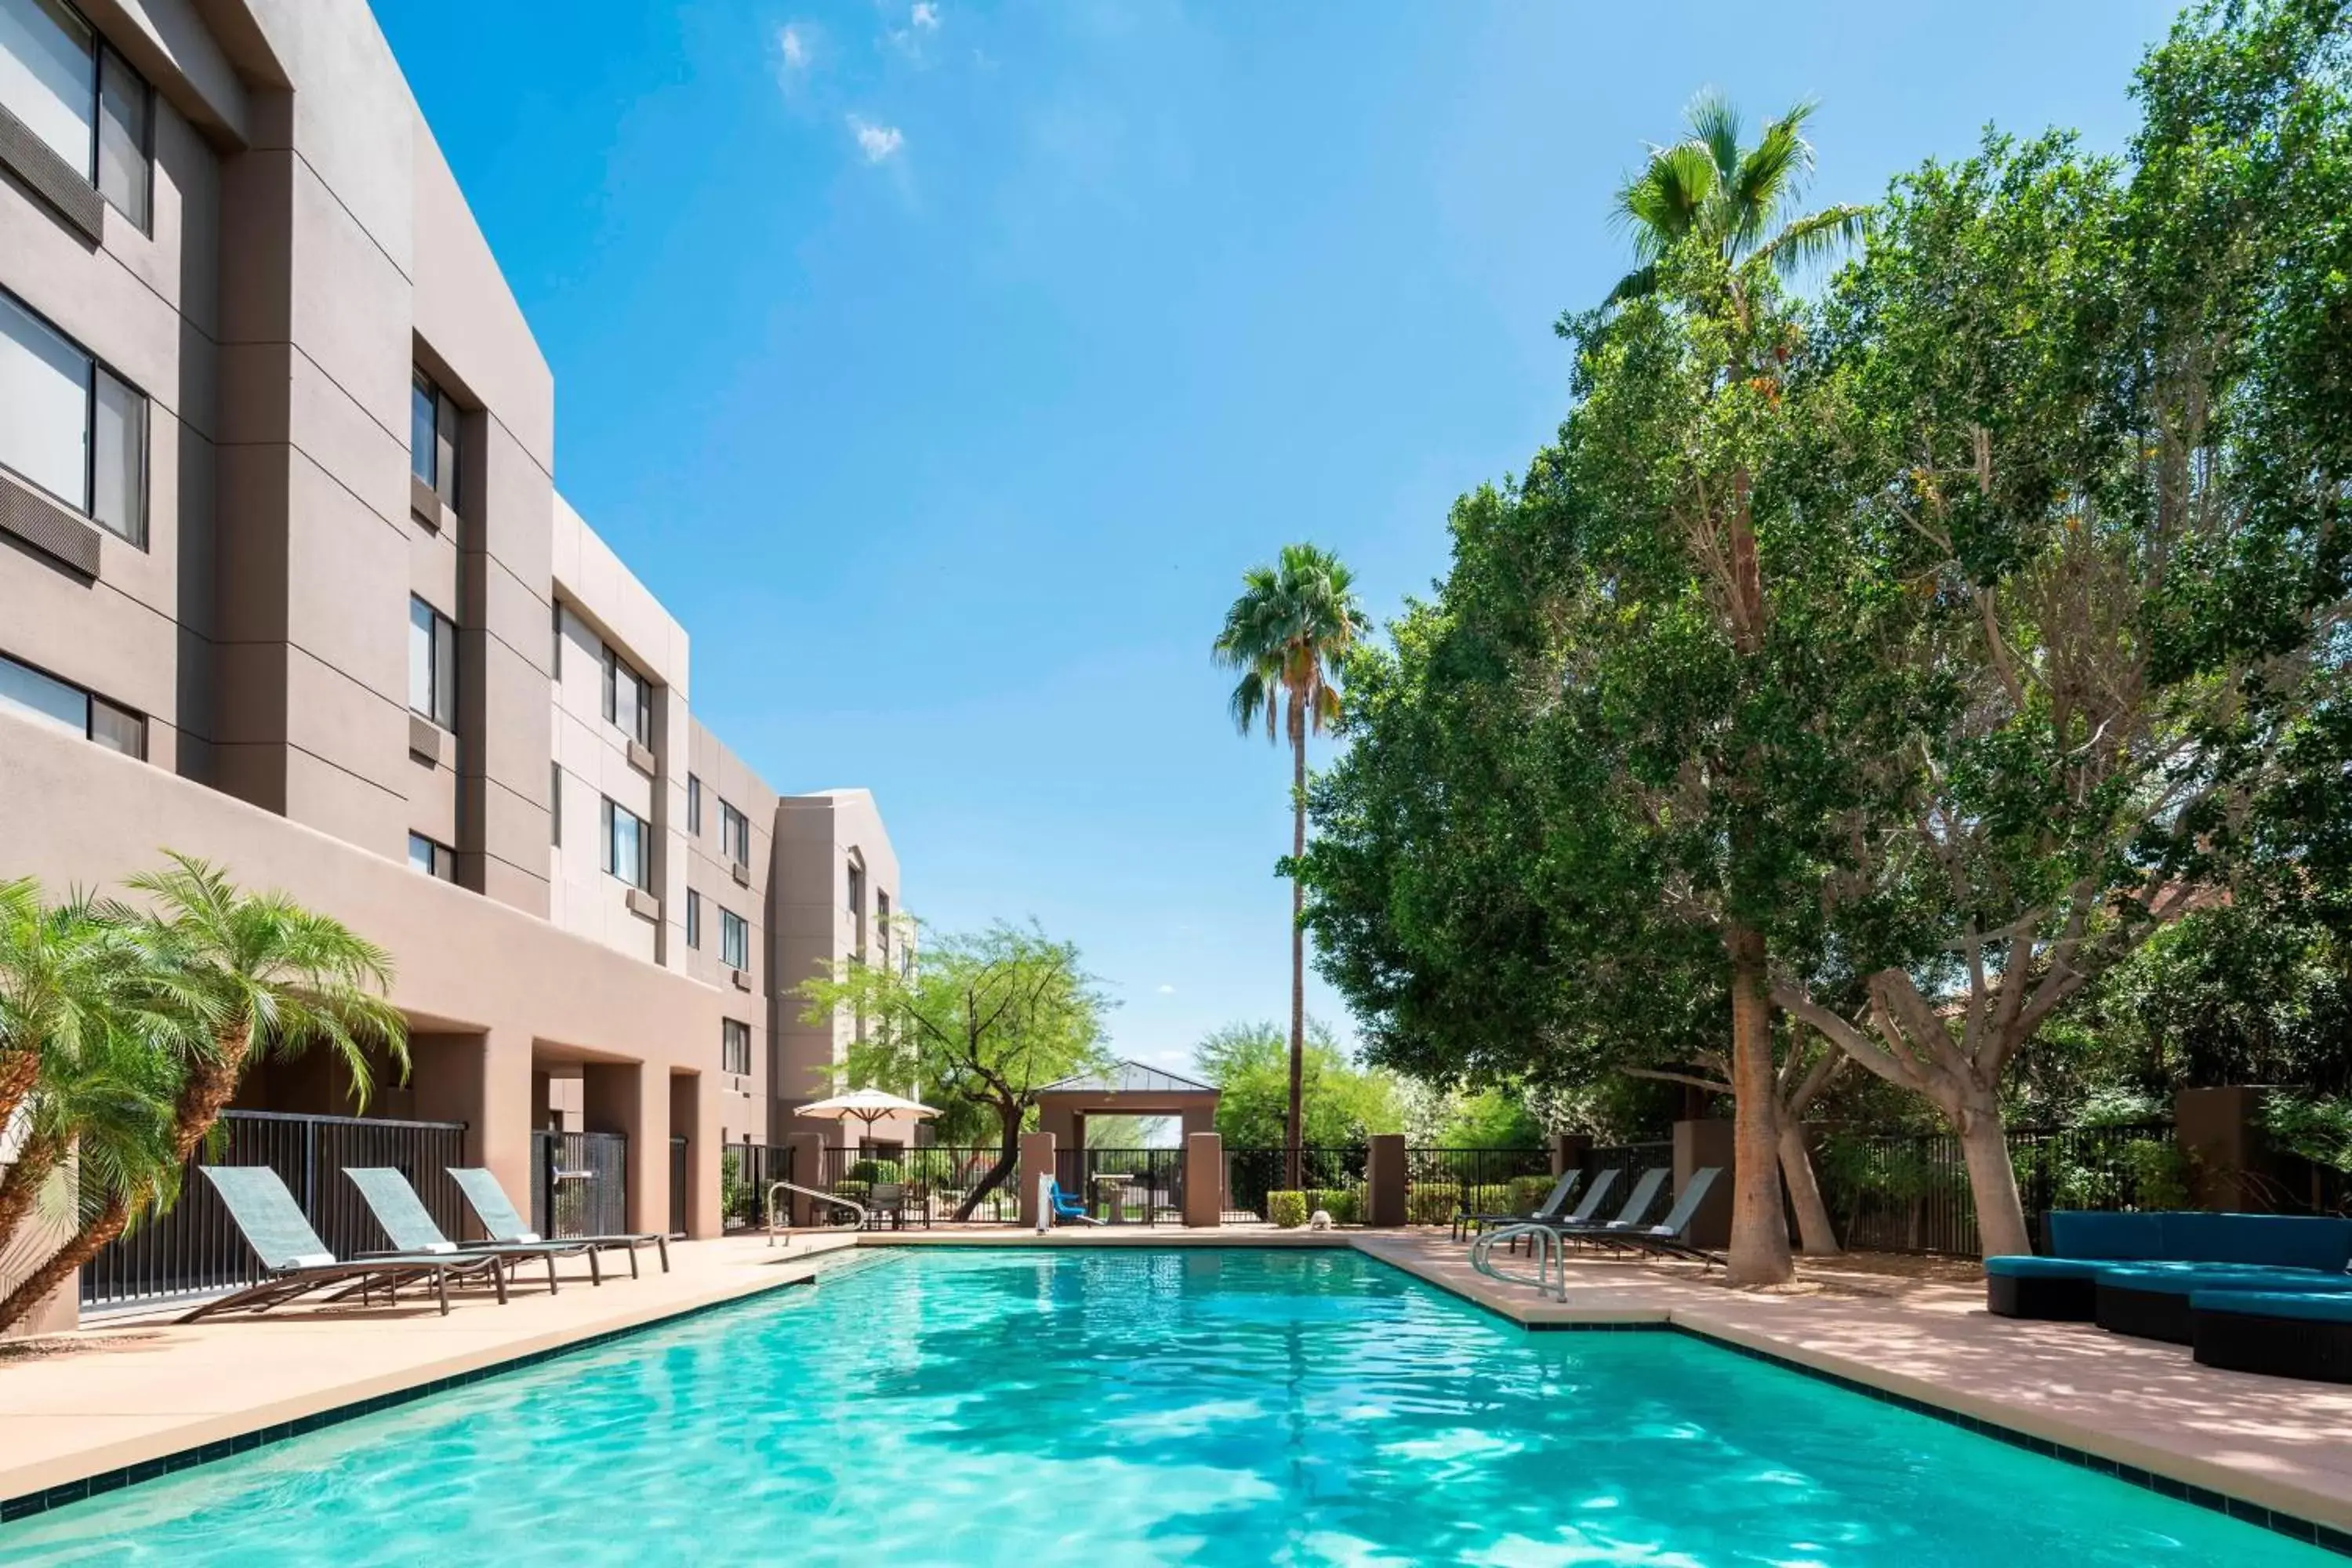 Swimming Pool in SpringHill Suites Scottsdale North